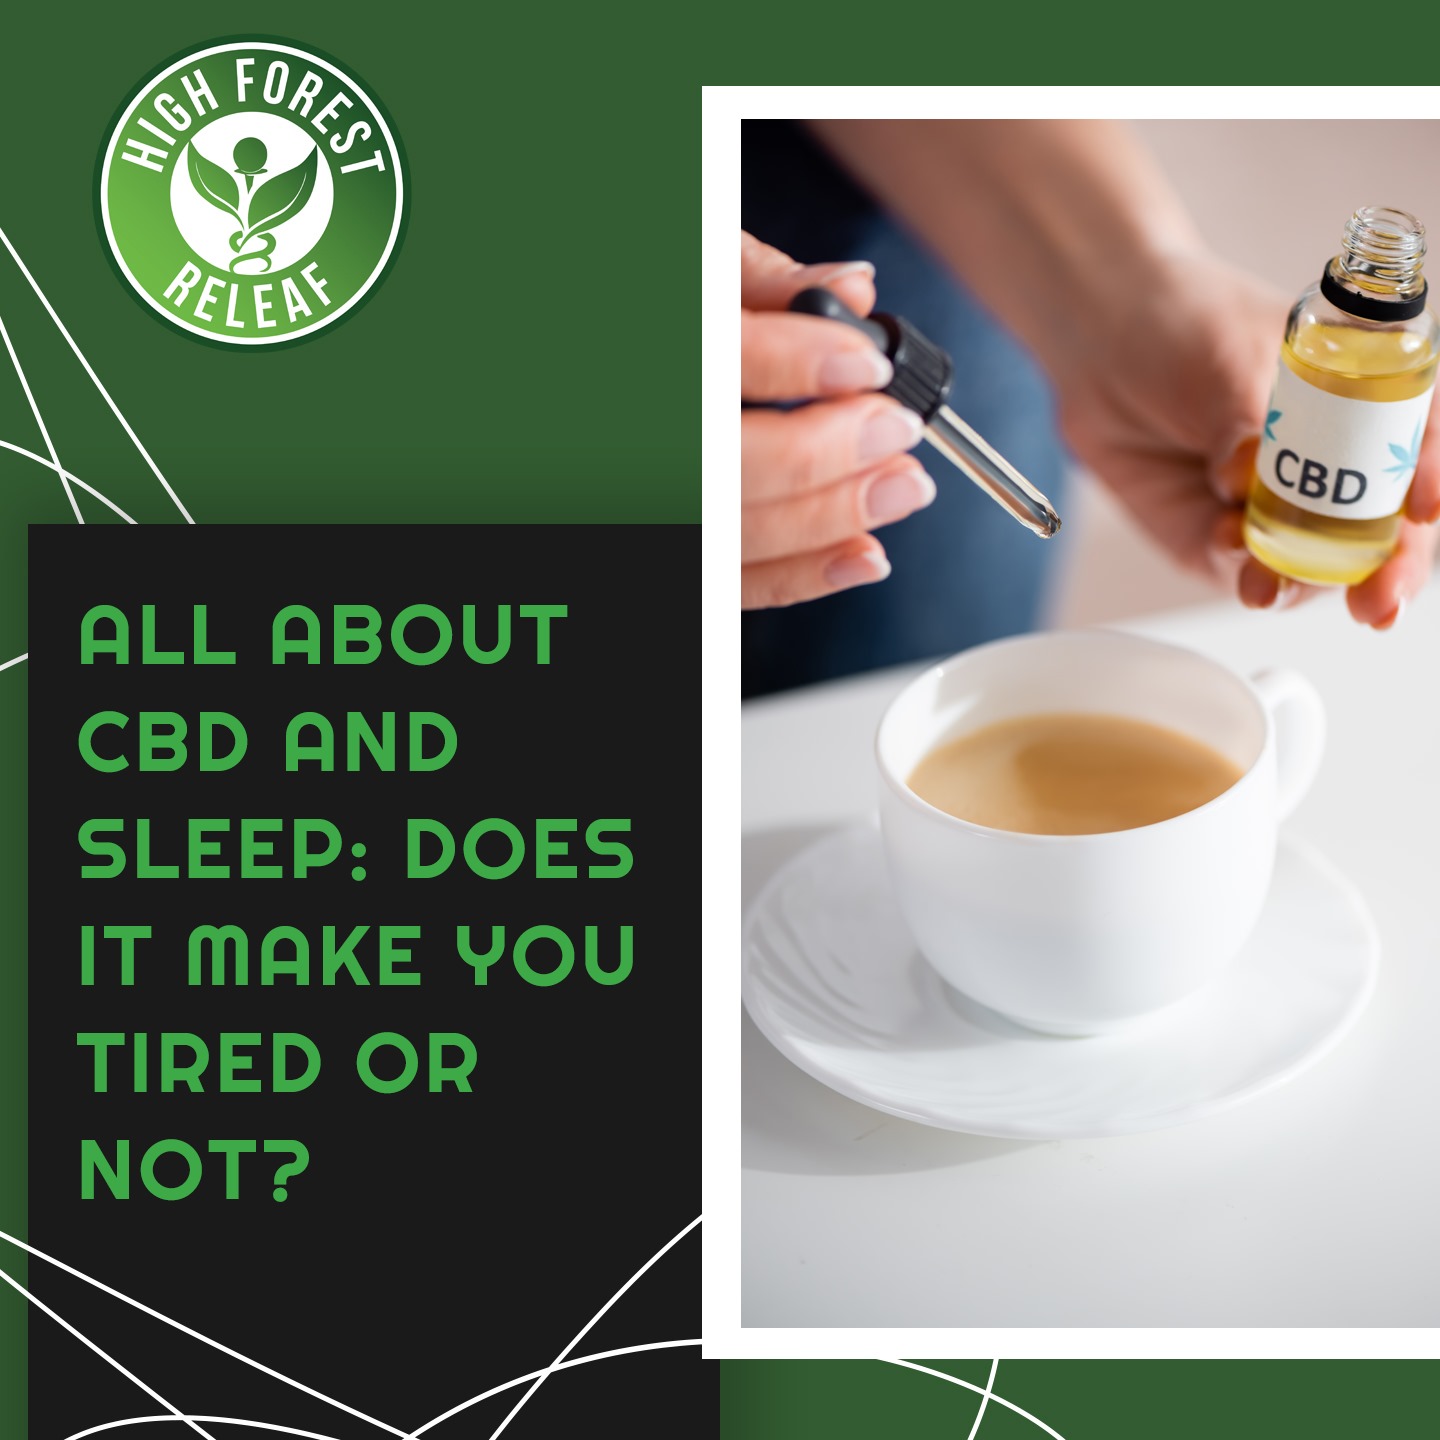 All About CBD and Sleep: Does It Make You Tired or Not?